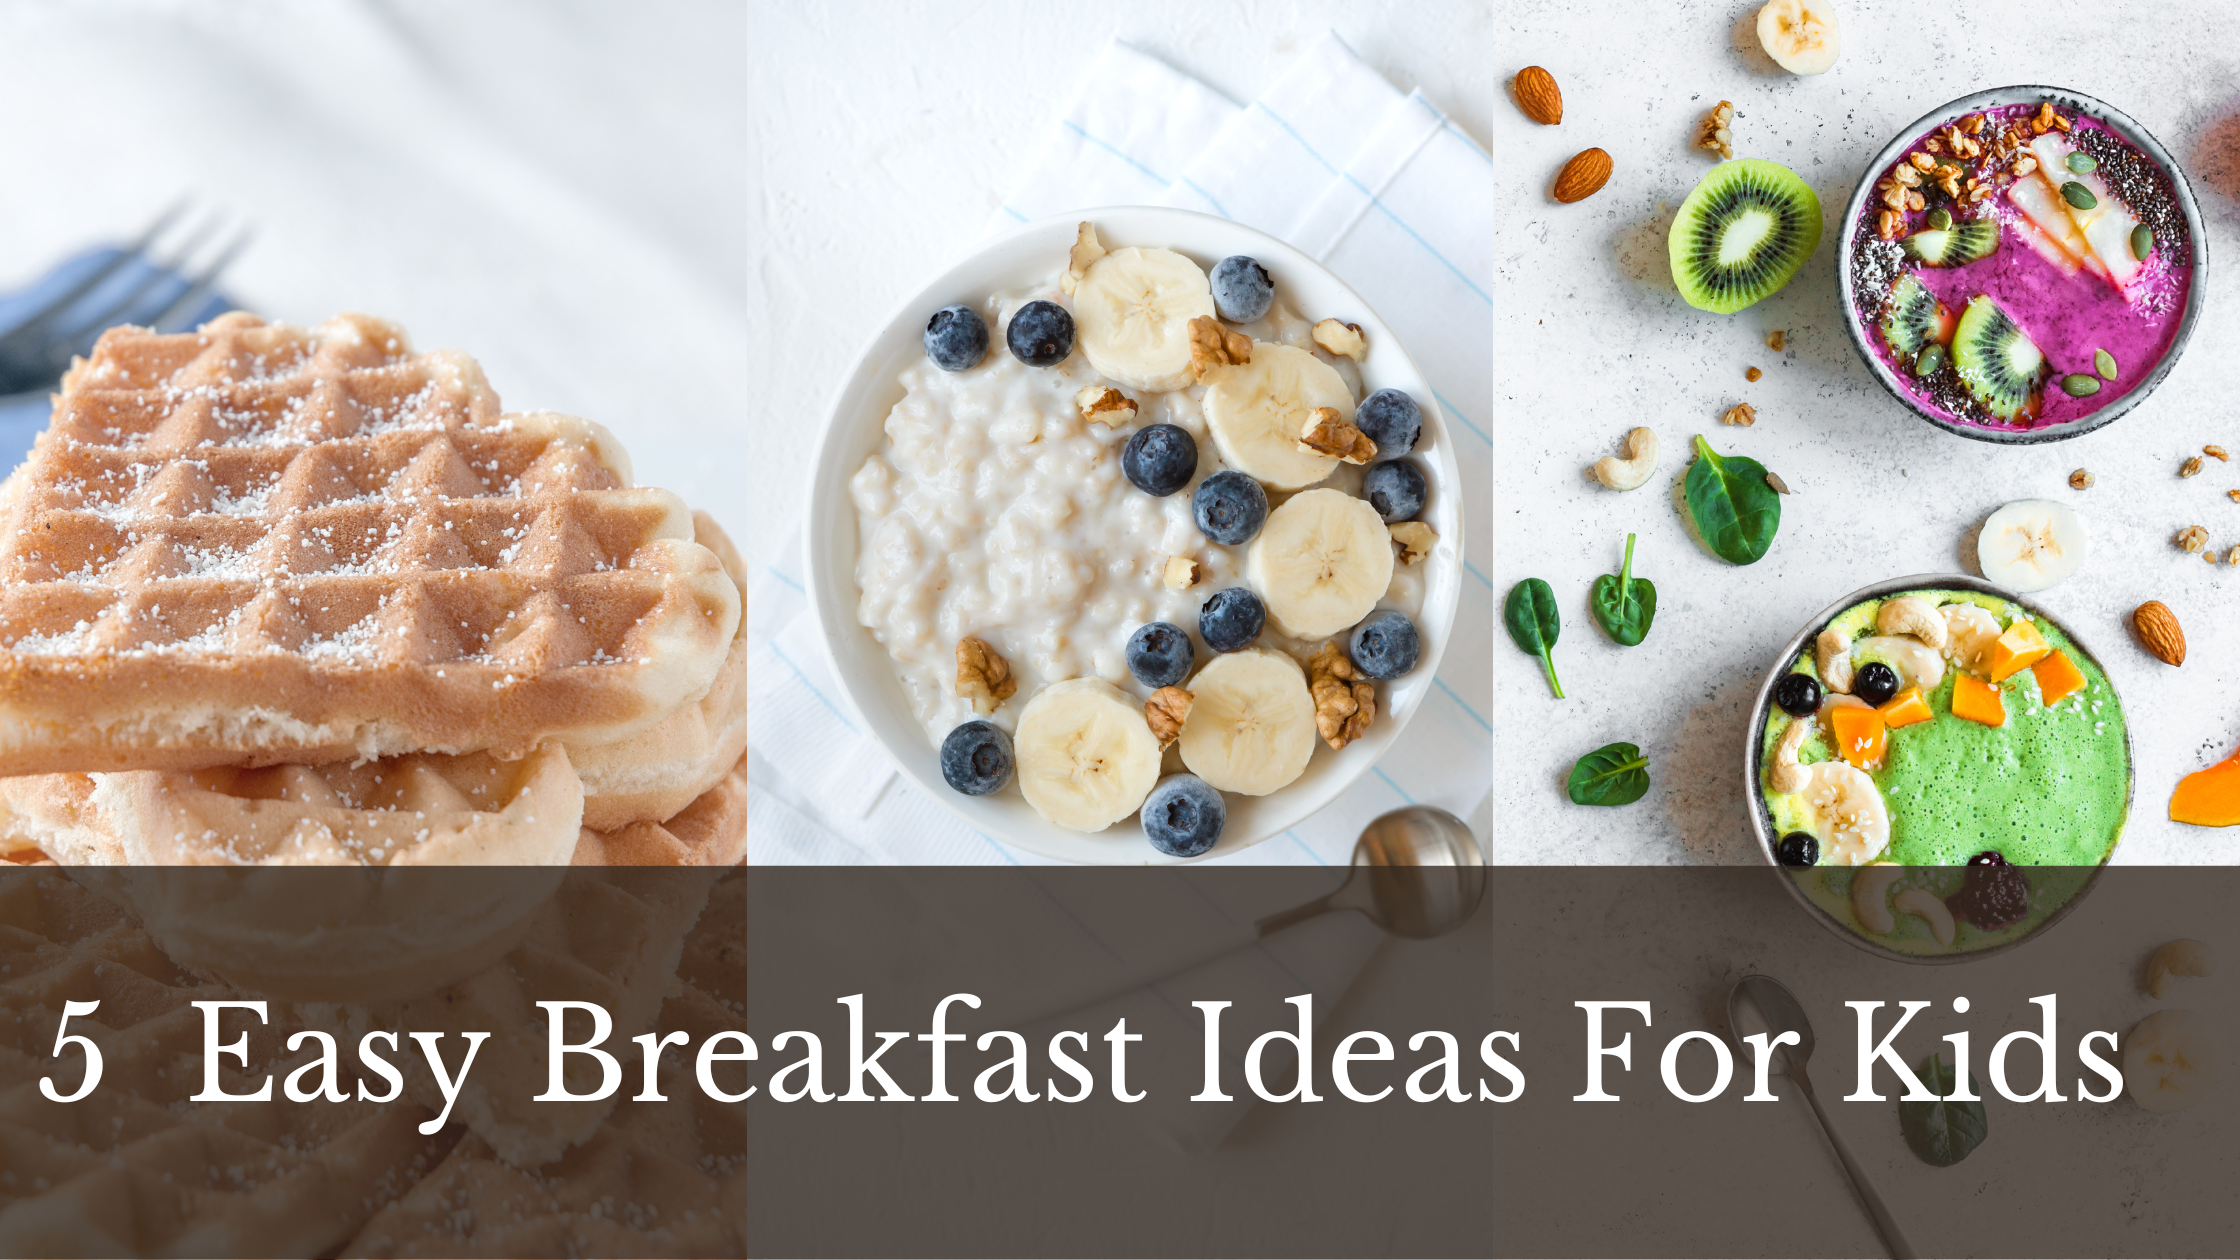 this picture shows a different kid friendly and healthy breakfast meal ideas. it shows waffles, oatmeal and smoothie bowl. With the title under 5 Easy breakfast ideas for kids.